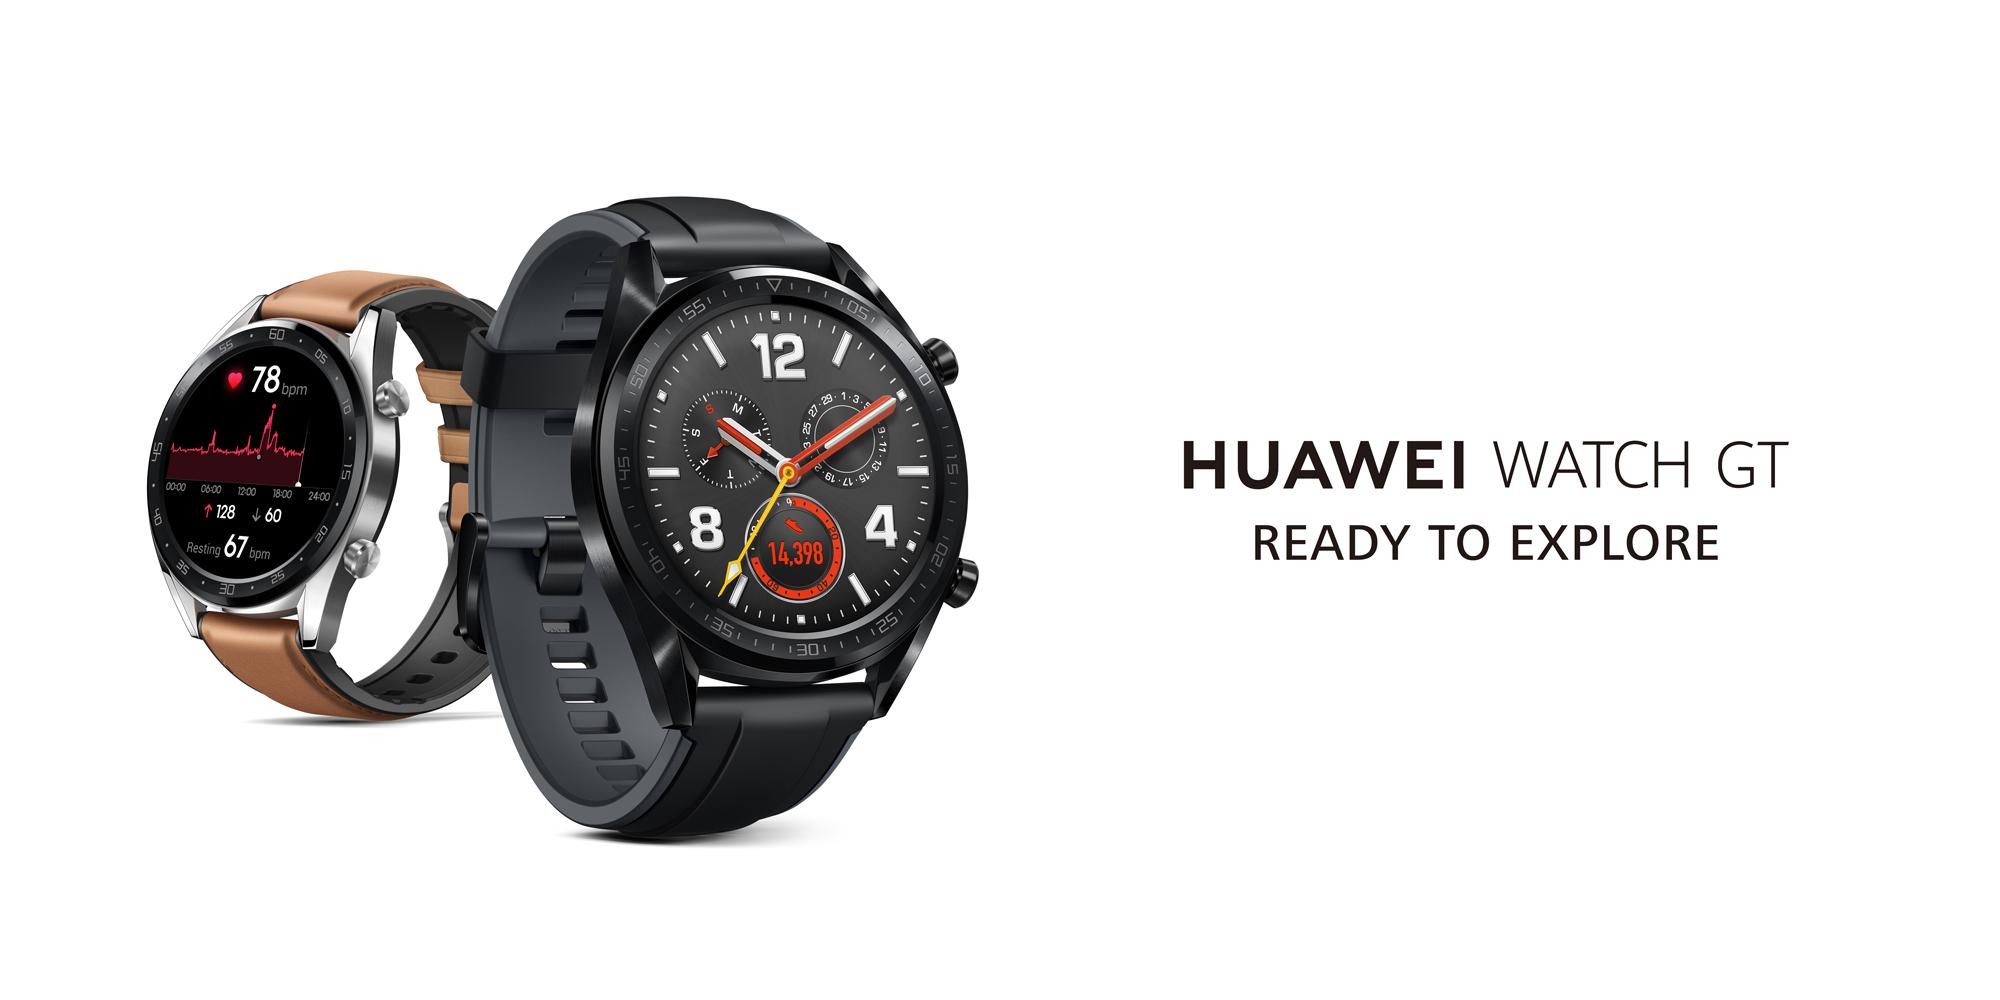 A Sporty Lifestyle Begins with HUAWEI WATCH GT – the First in a Host of Huawei Smart Products Coming to Pakistan